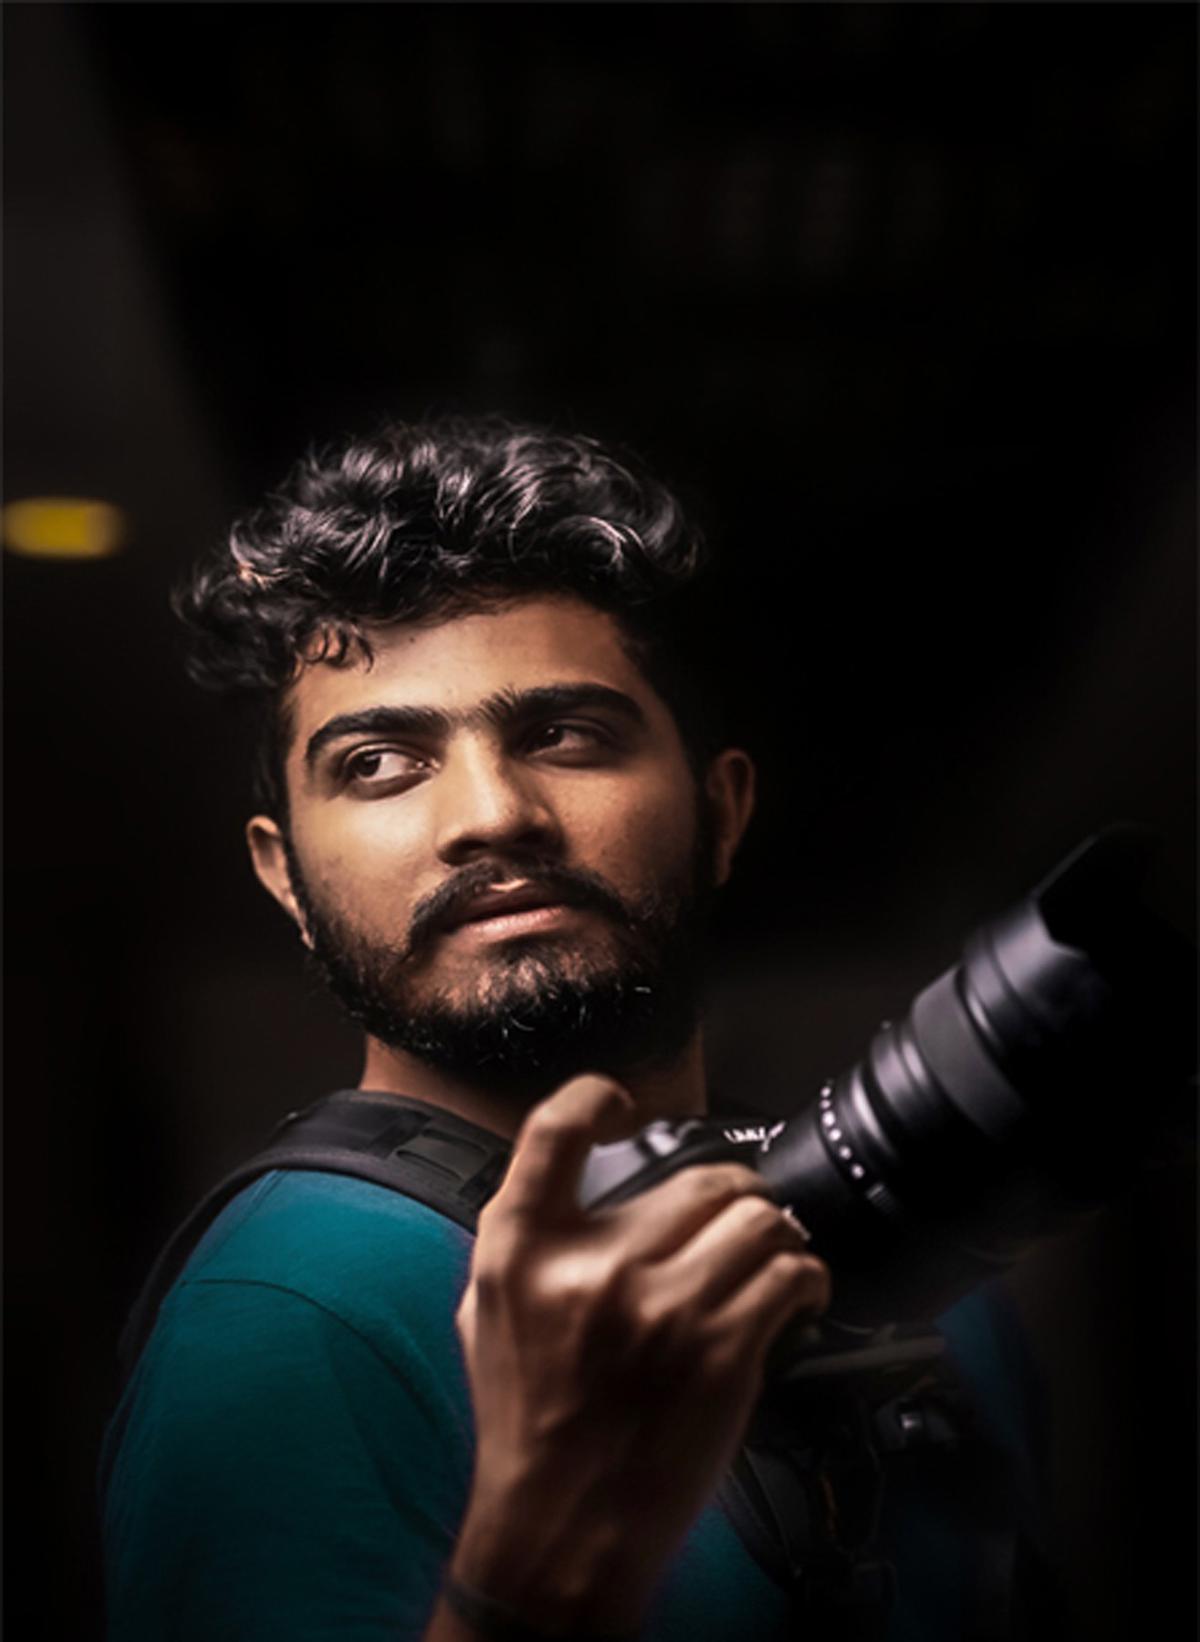 Mangaluru-based young photographer Vivek Gowda has won the prestigious Askaray Photo Award instituted by the Youth Photographic Society, Bengaluru, for his photo series on the Intha fishermen of Myanmar. The award was presented to him in absentia in Bengaluru on Saturday. 